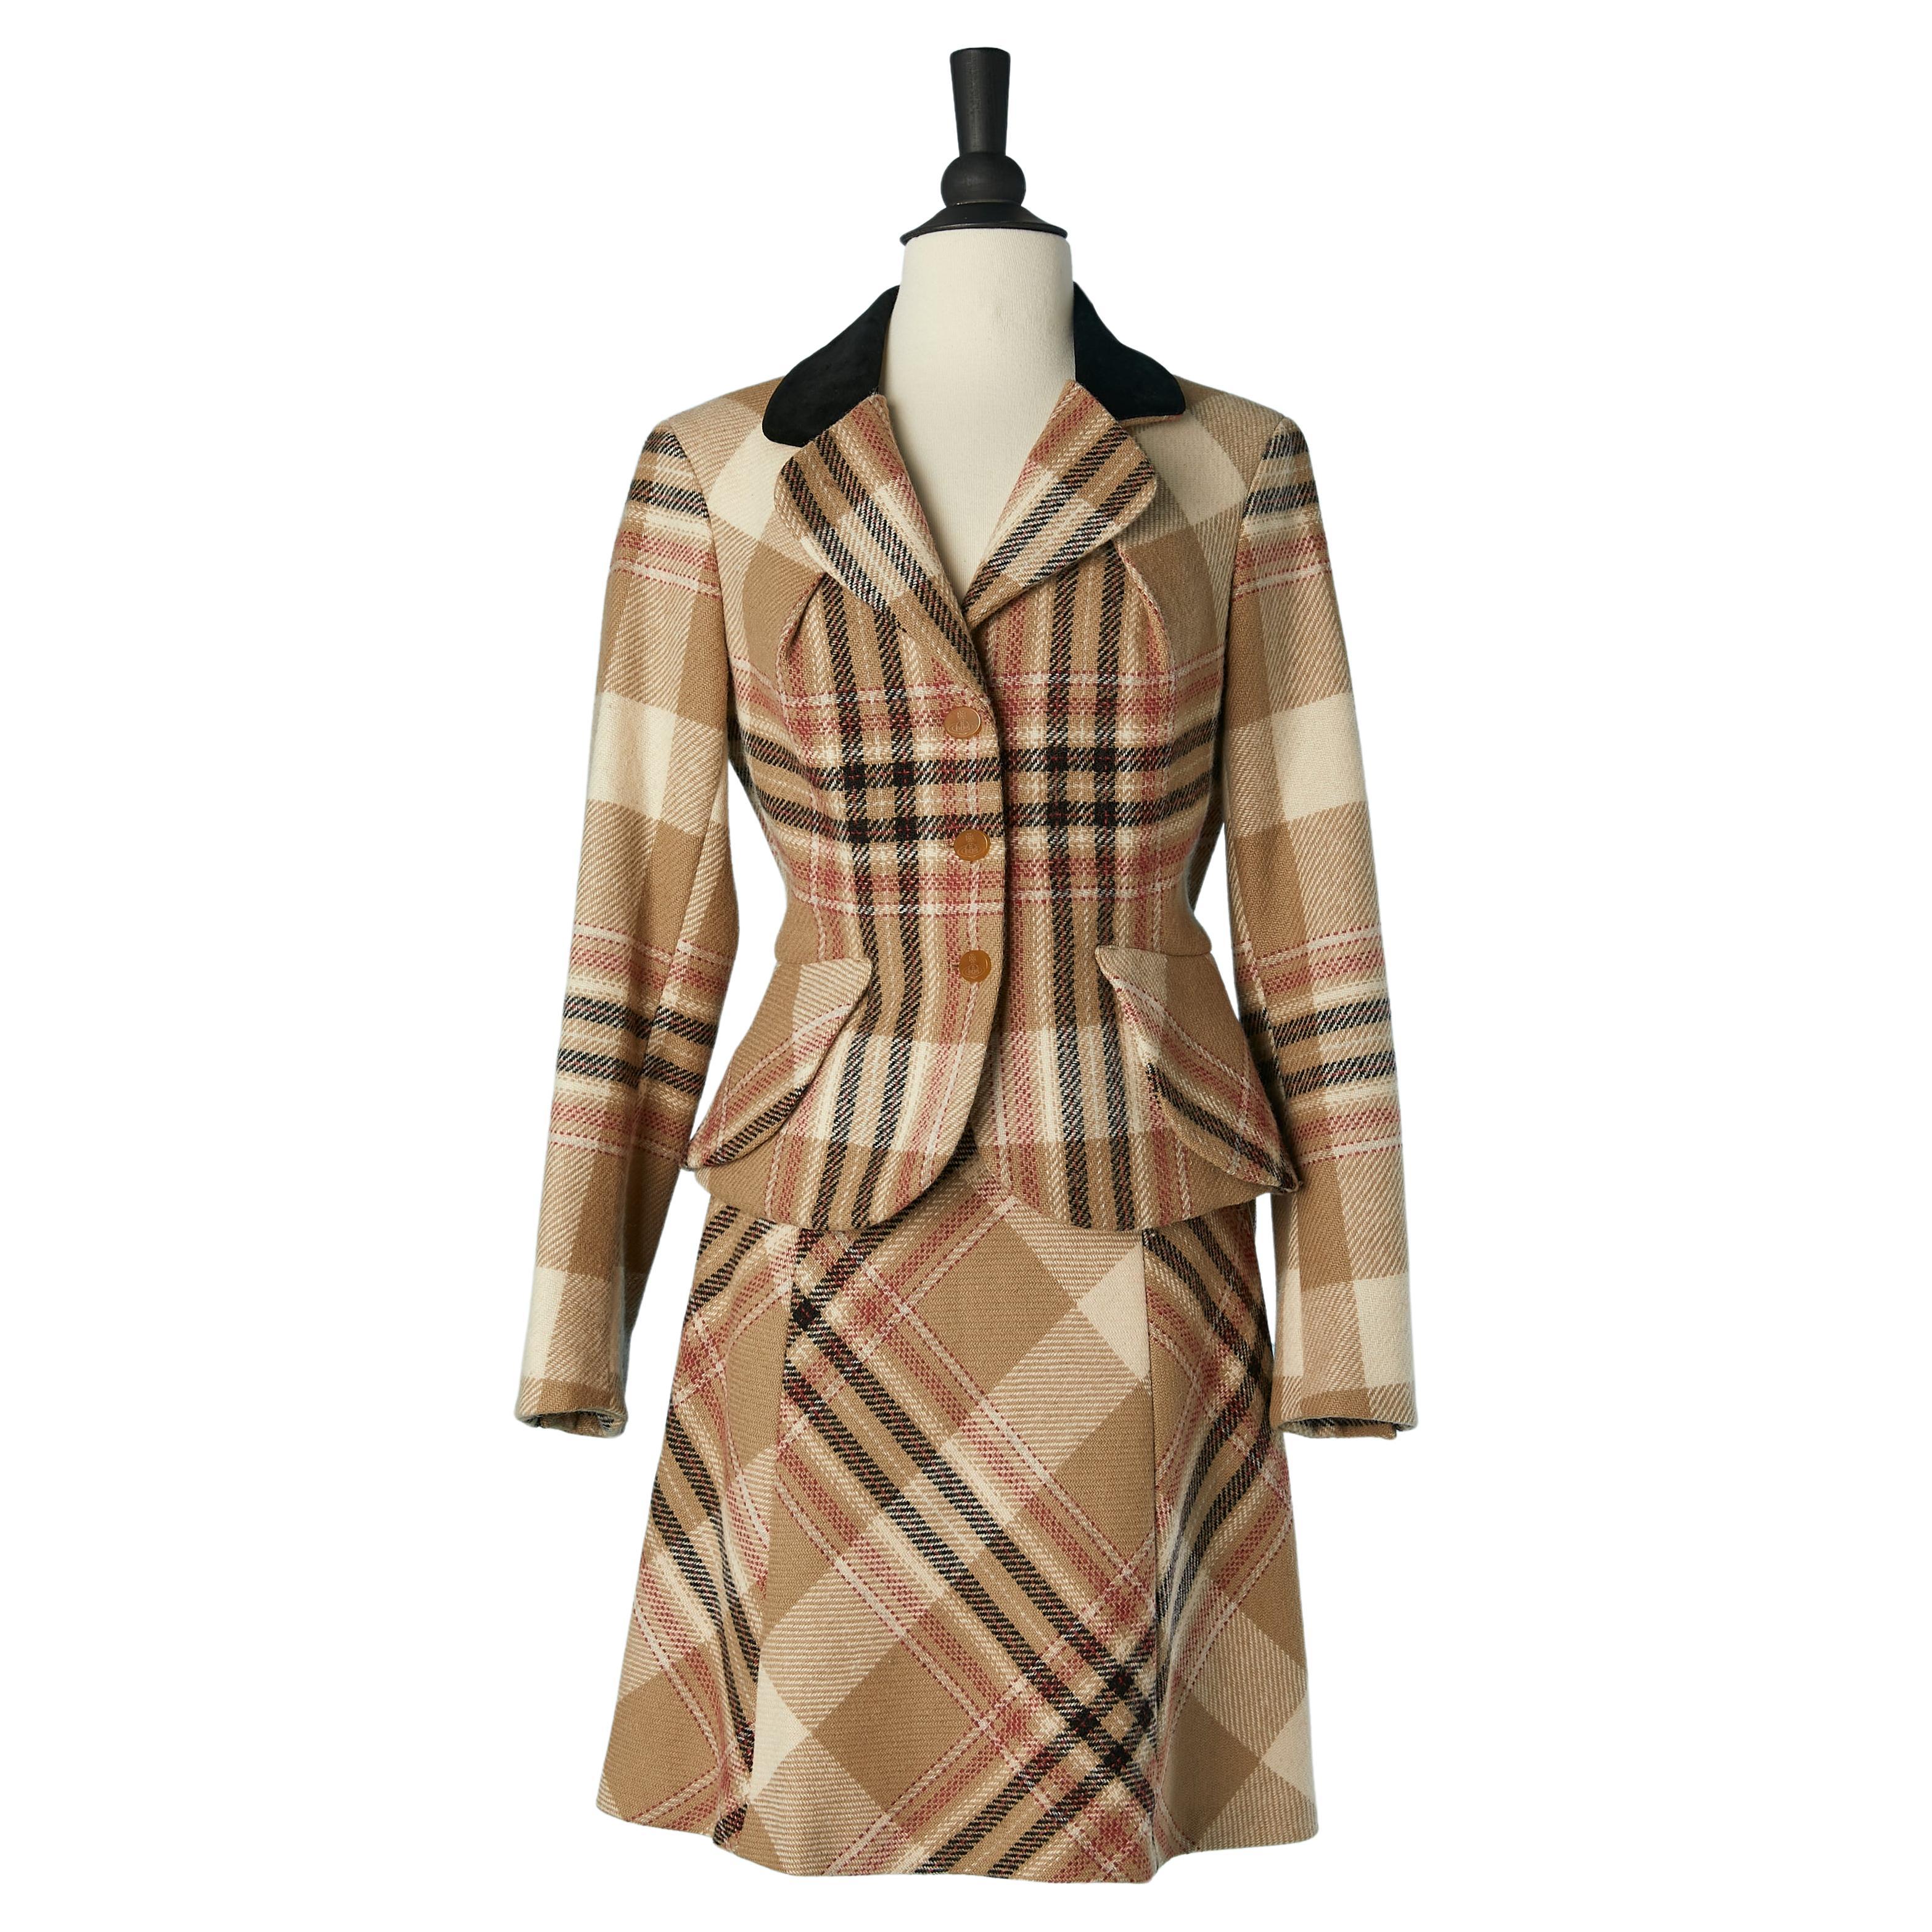 Iconic Tartan skirt-suit with " faux-cul" on the skirt Vivienne Westwood  For Sale